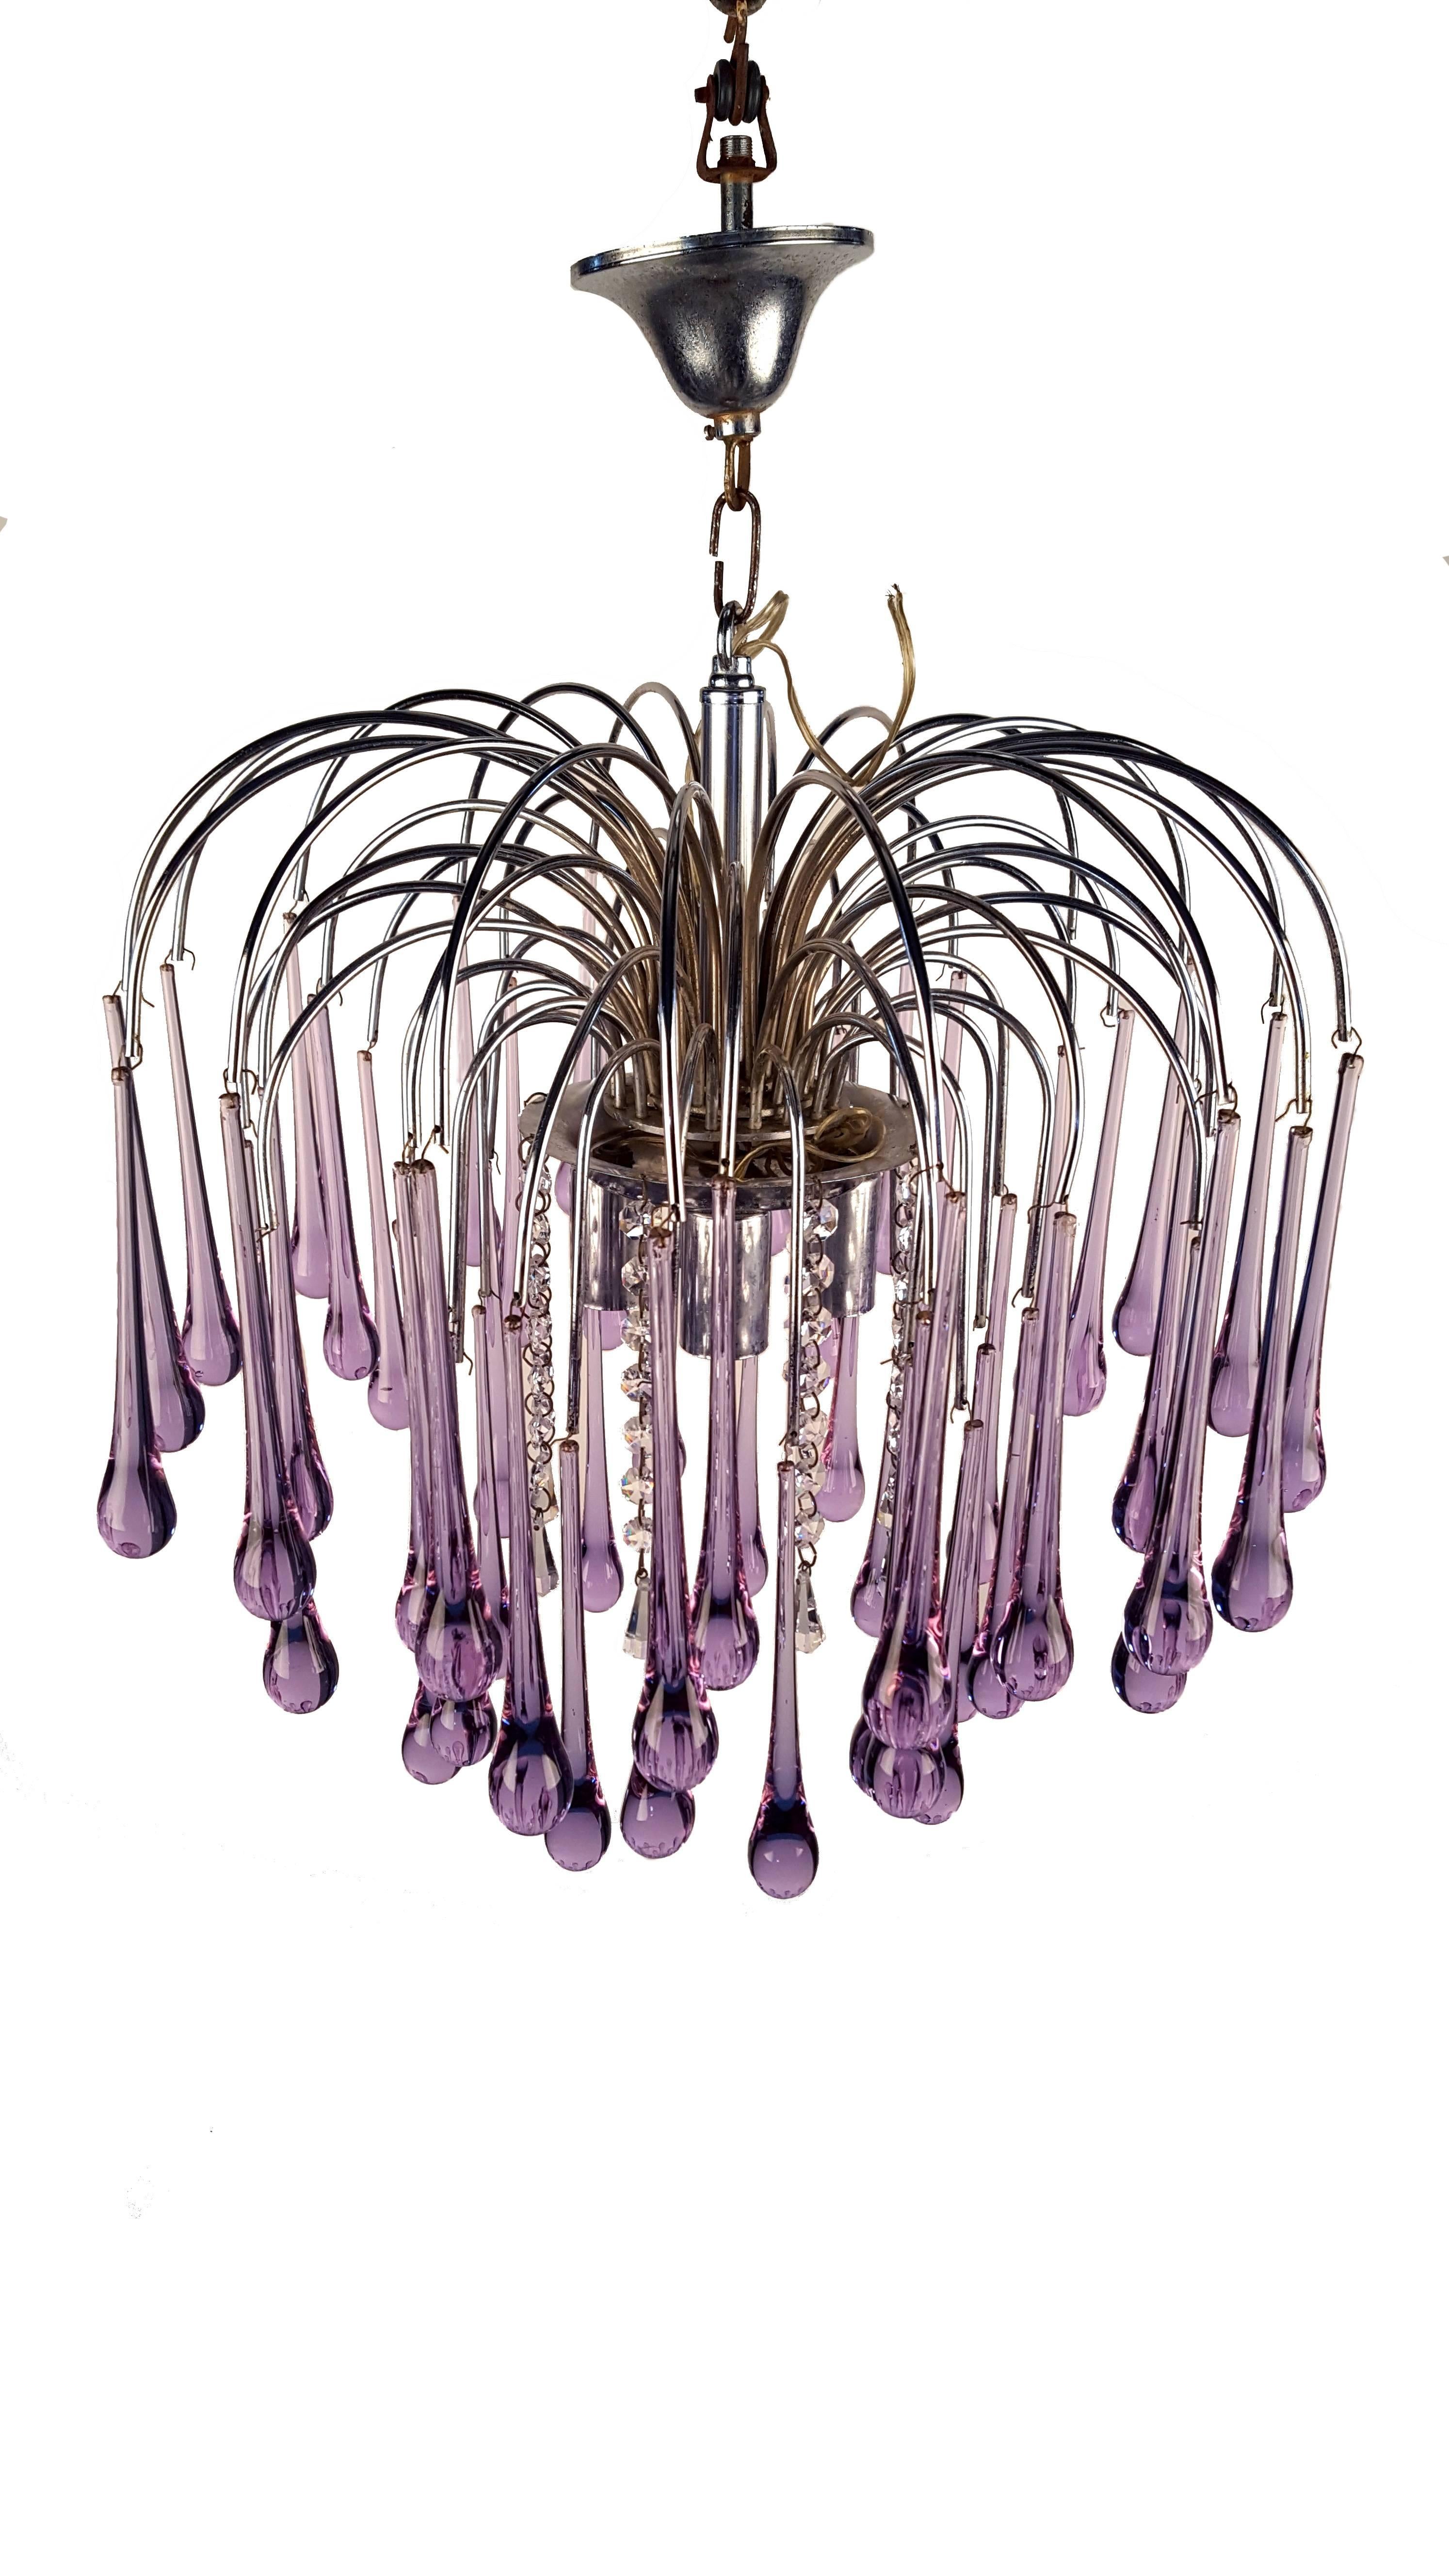 Mid-20th Century Murano purple crystal teardrop chandelier by 1960s Italian designer Paolo Venini. Strings of smaller hexagonal crystals closest to the light bulbs enhance the unique reflective quality of this pendant light.

Measures: Height: 50